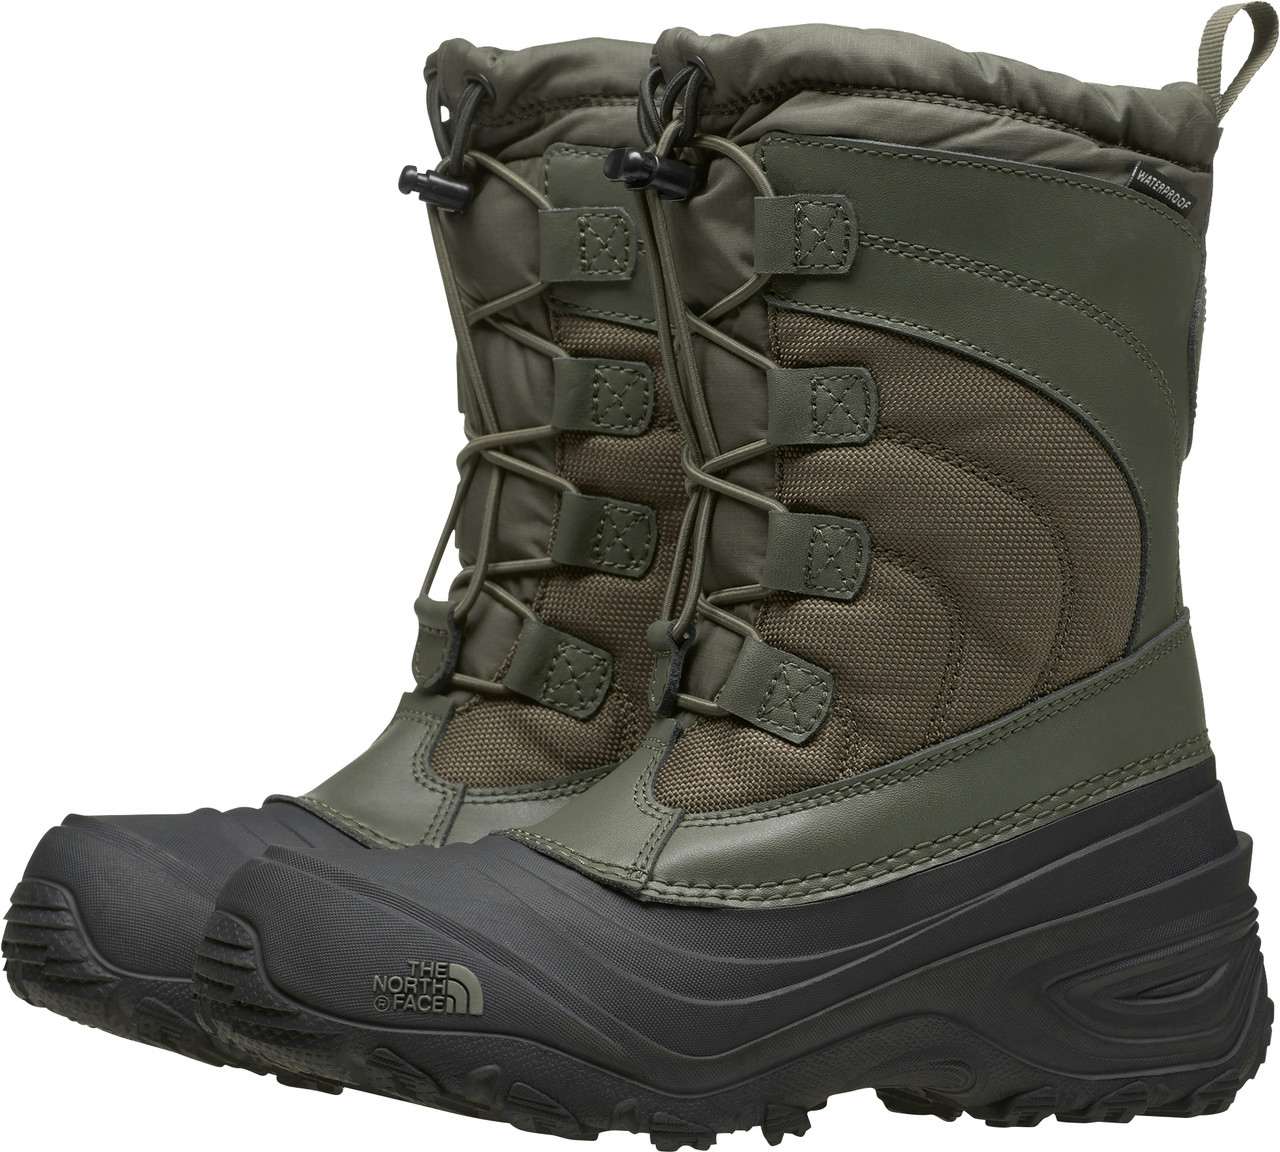 Alpenglow IV Waterproof Winter Boots New Taupe Green/TNF Black